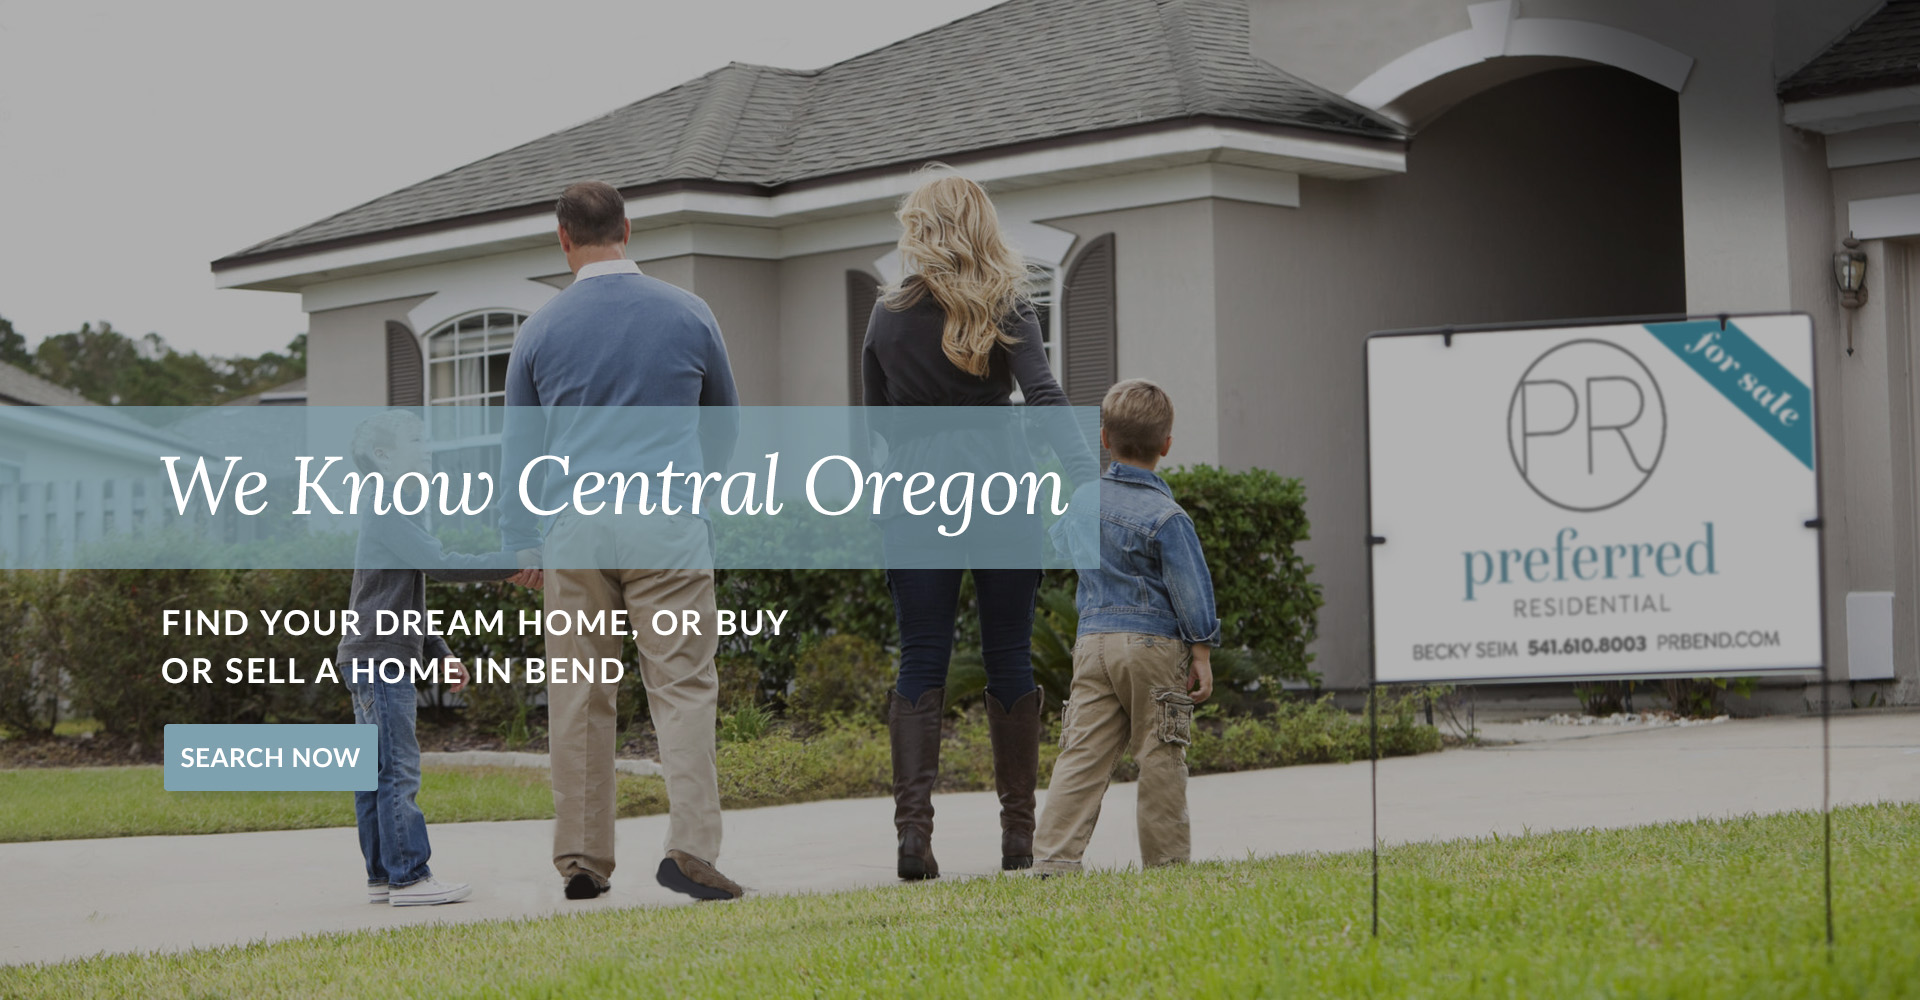 Buying a home in Central Oregon